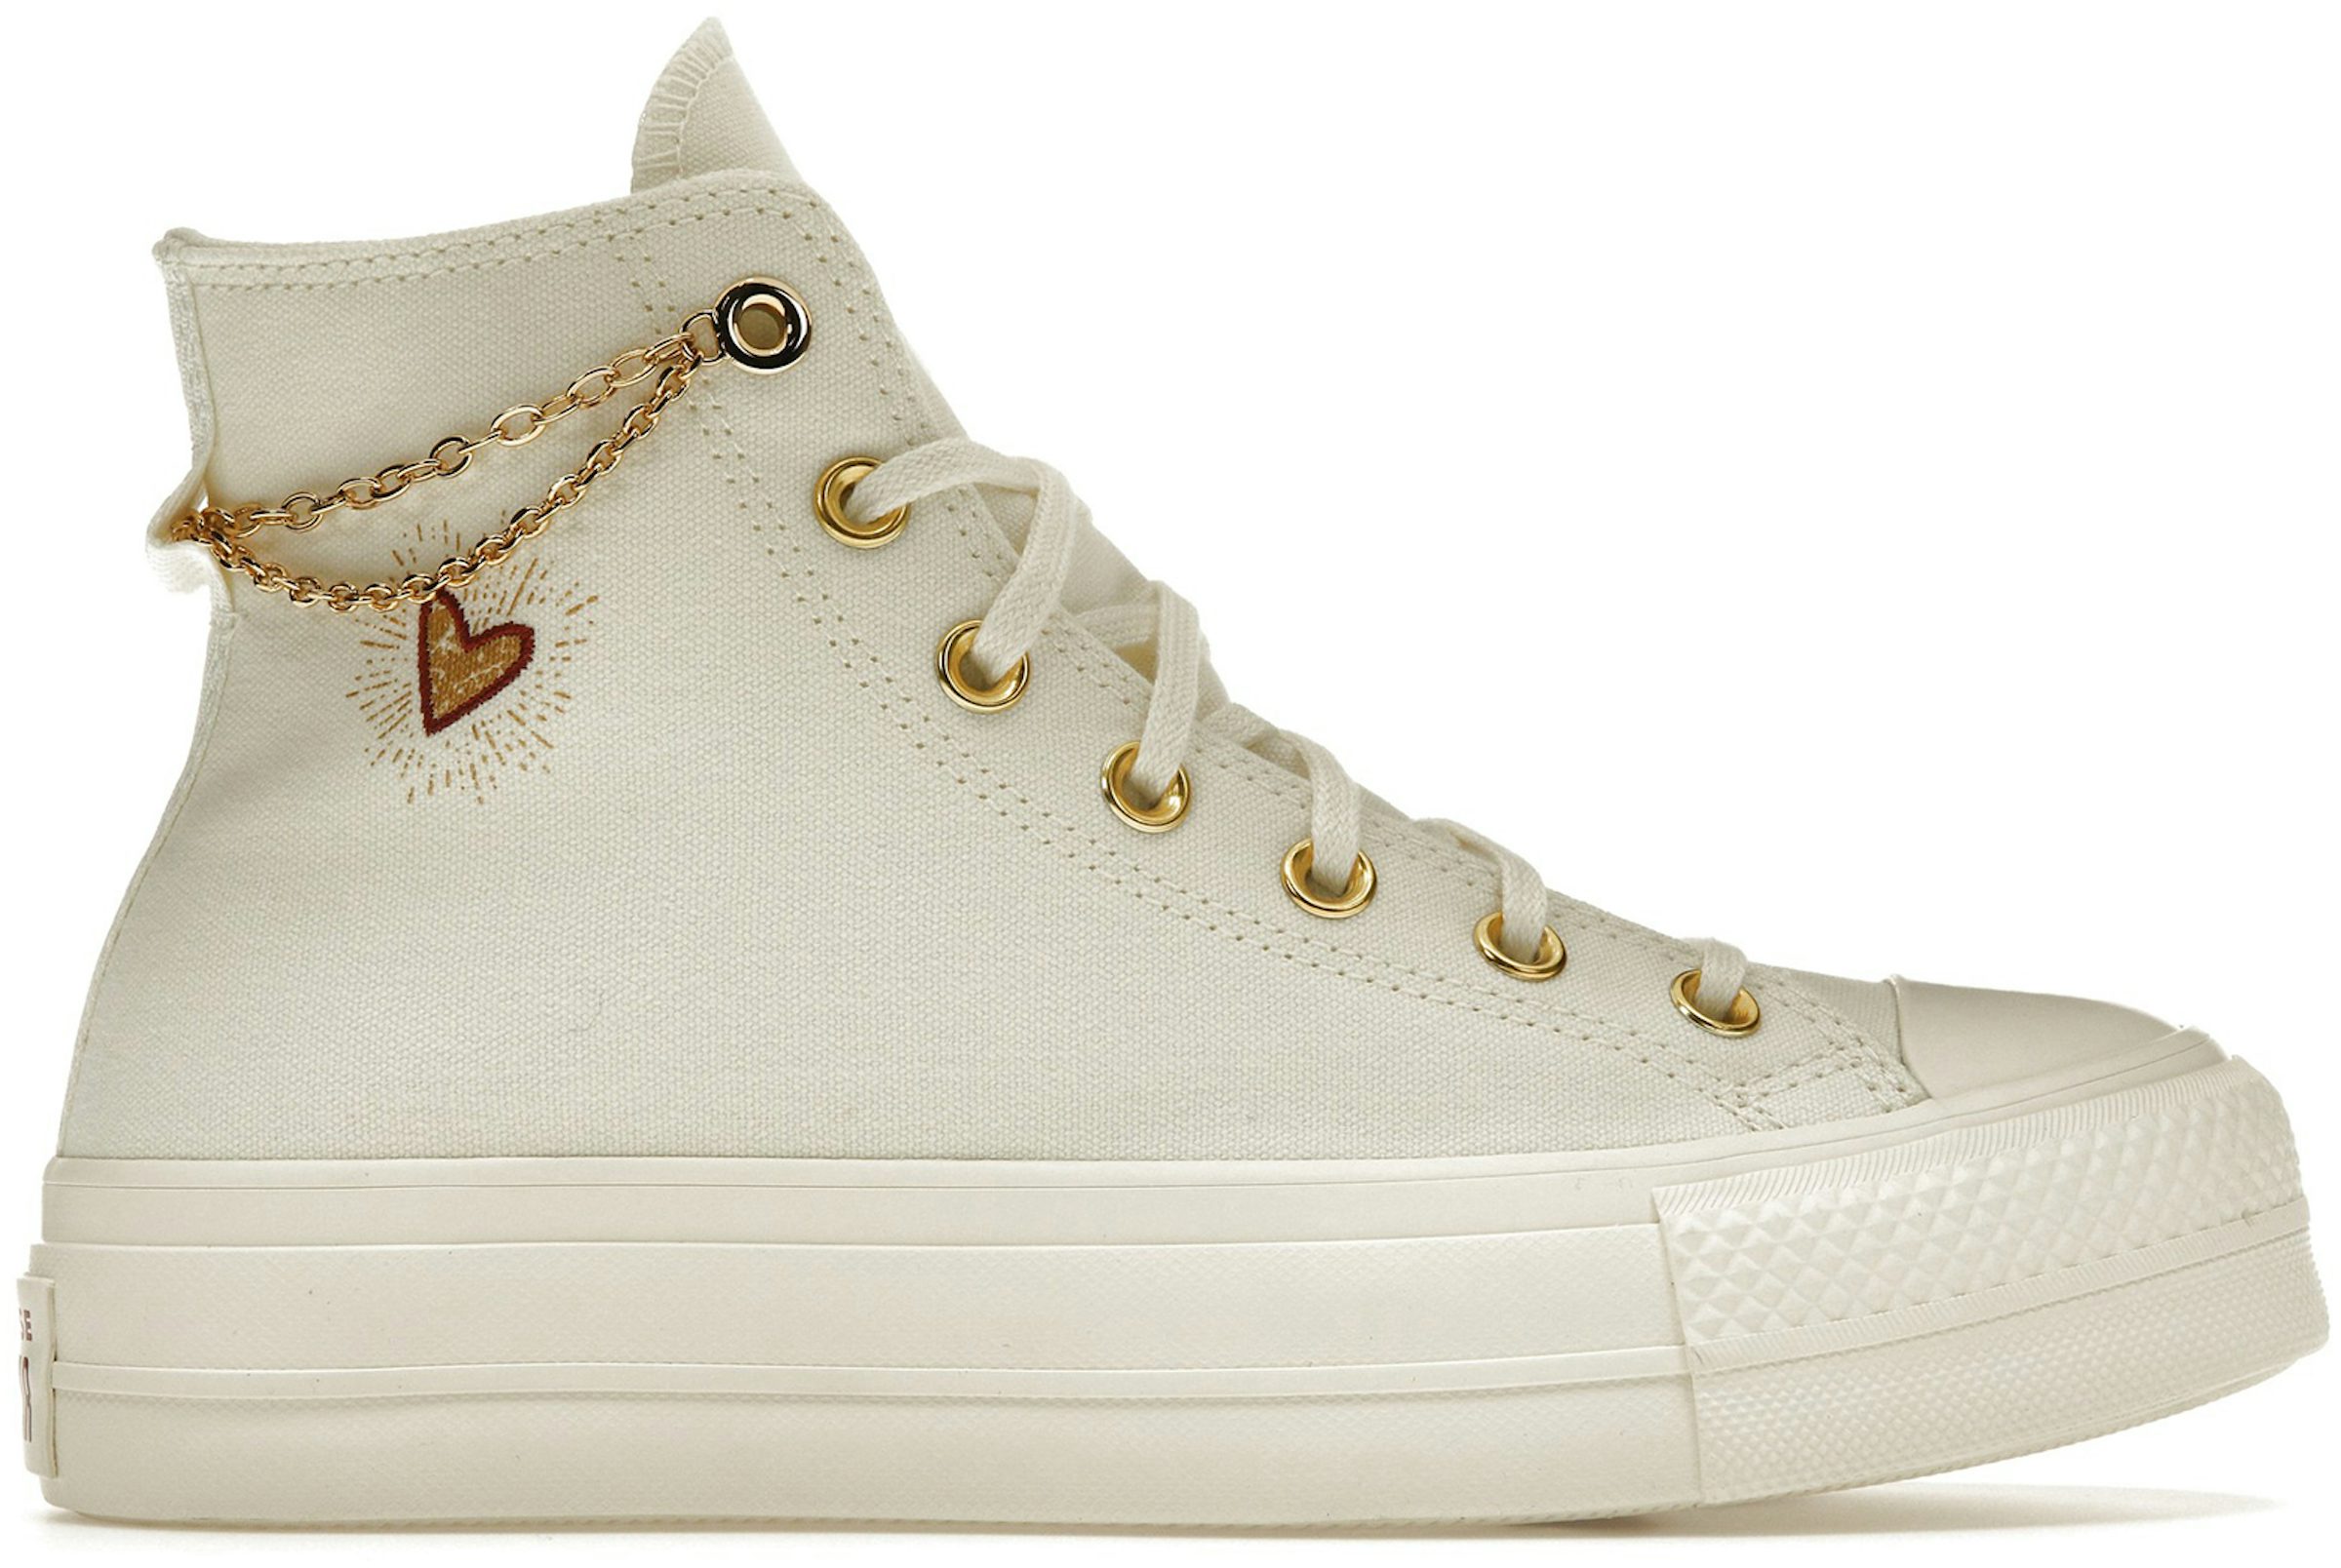 Converse Chuck Taylor Dainty Sneakers In Black With Gold Eyelets